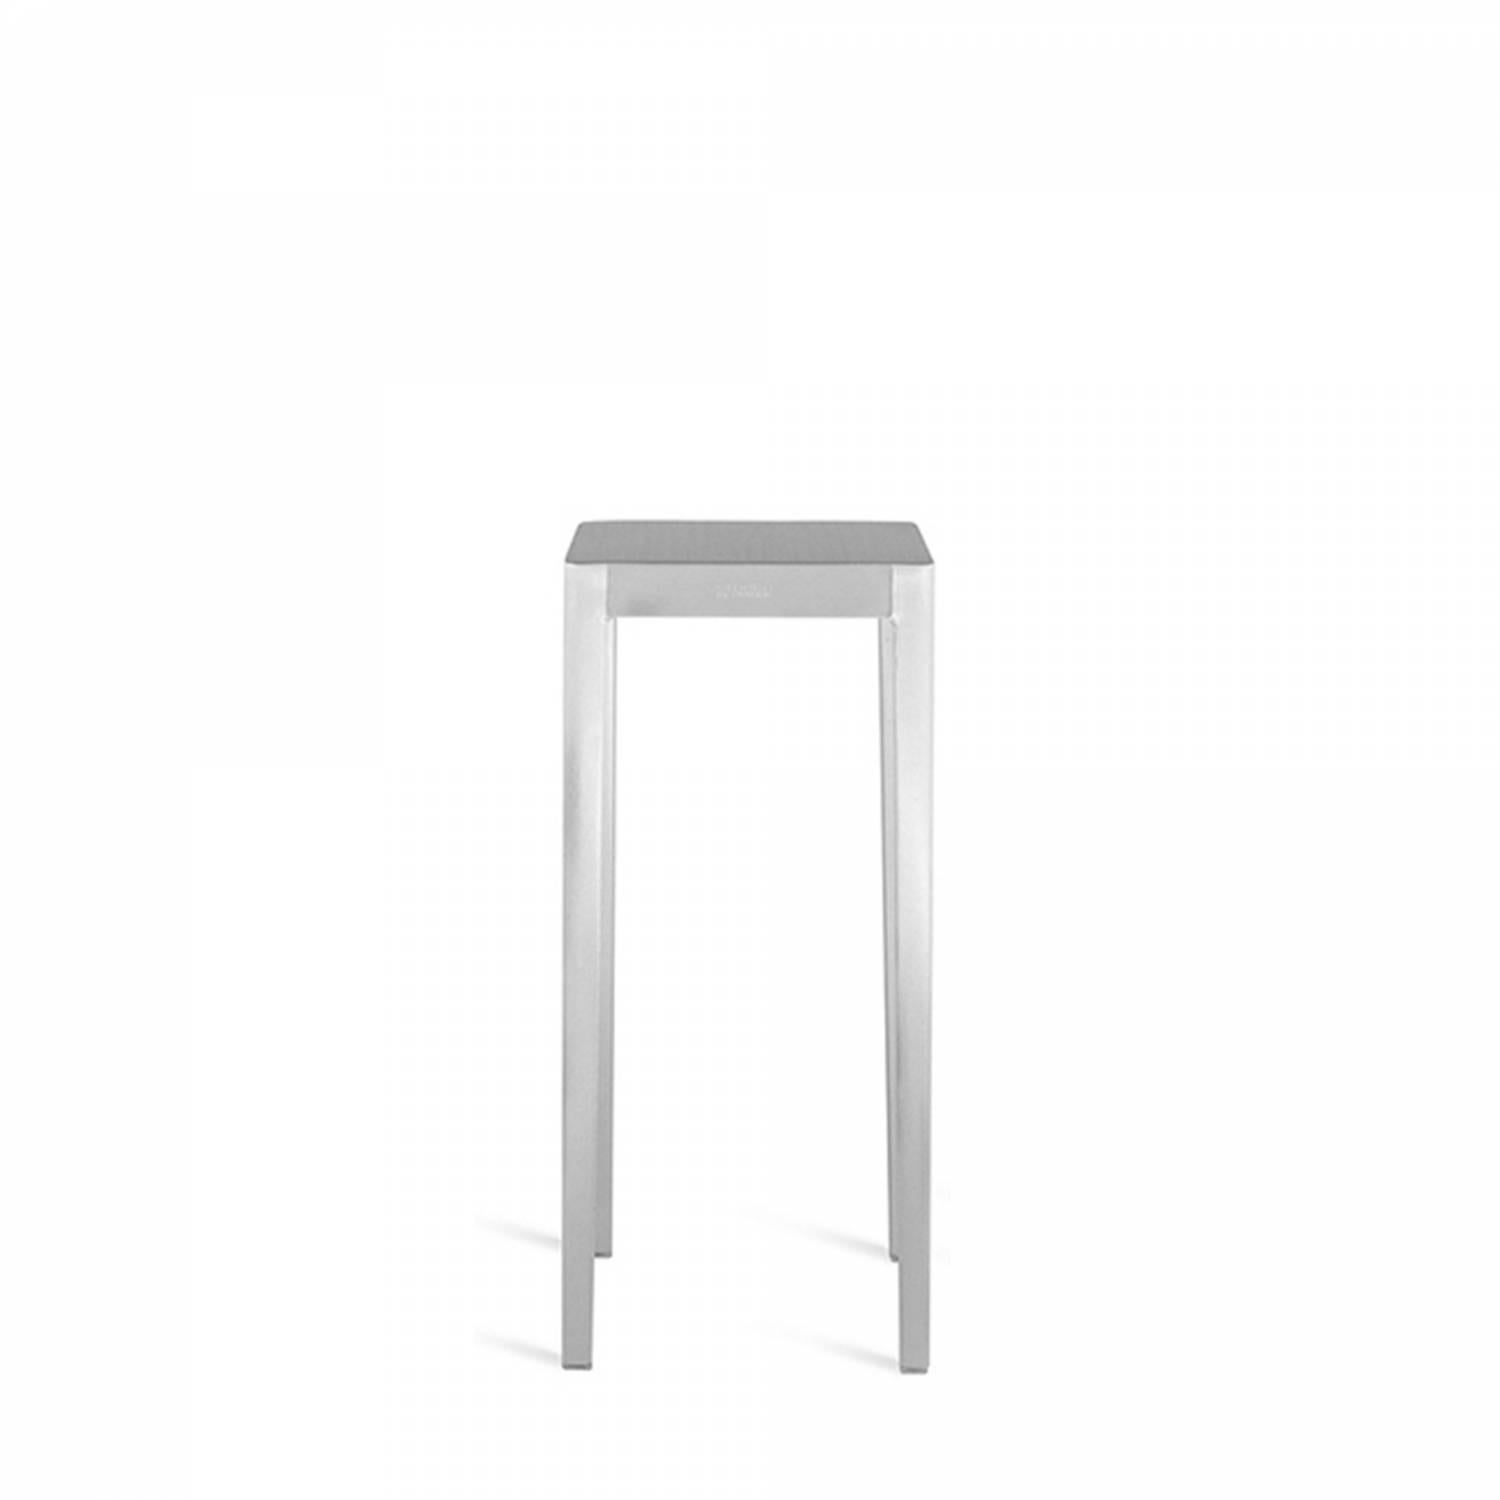 Emeco occasional table in brushed recycled aluminum designed by Philippe Starck as a collaboration with the world-renown designer and Emeco.

Product dimensions: Width 14